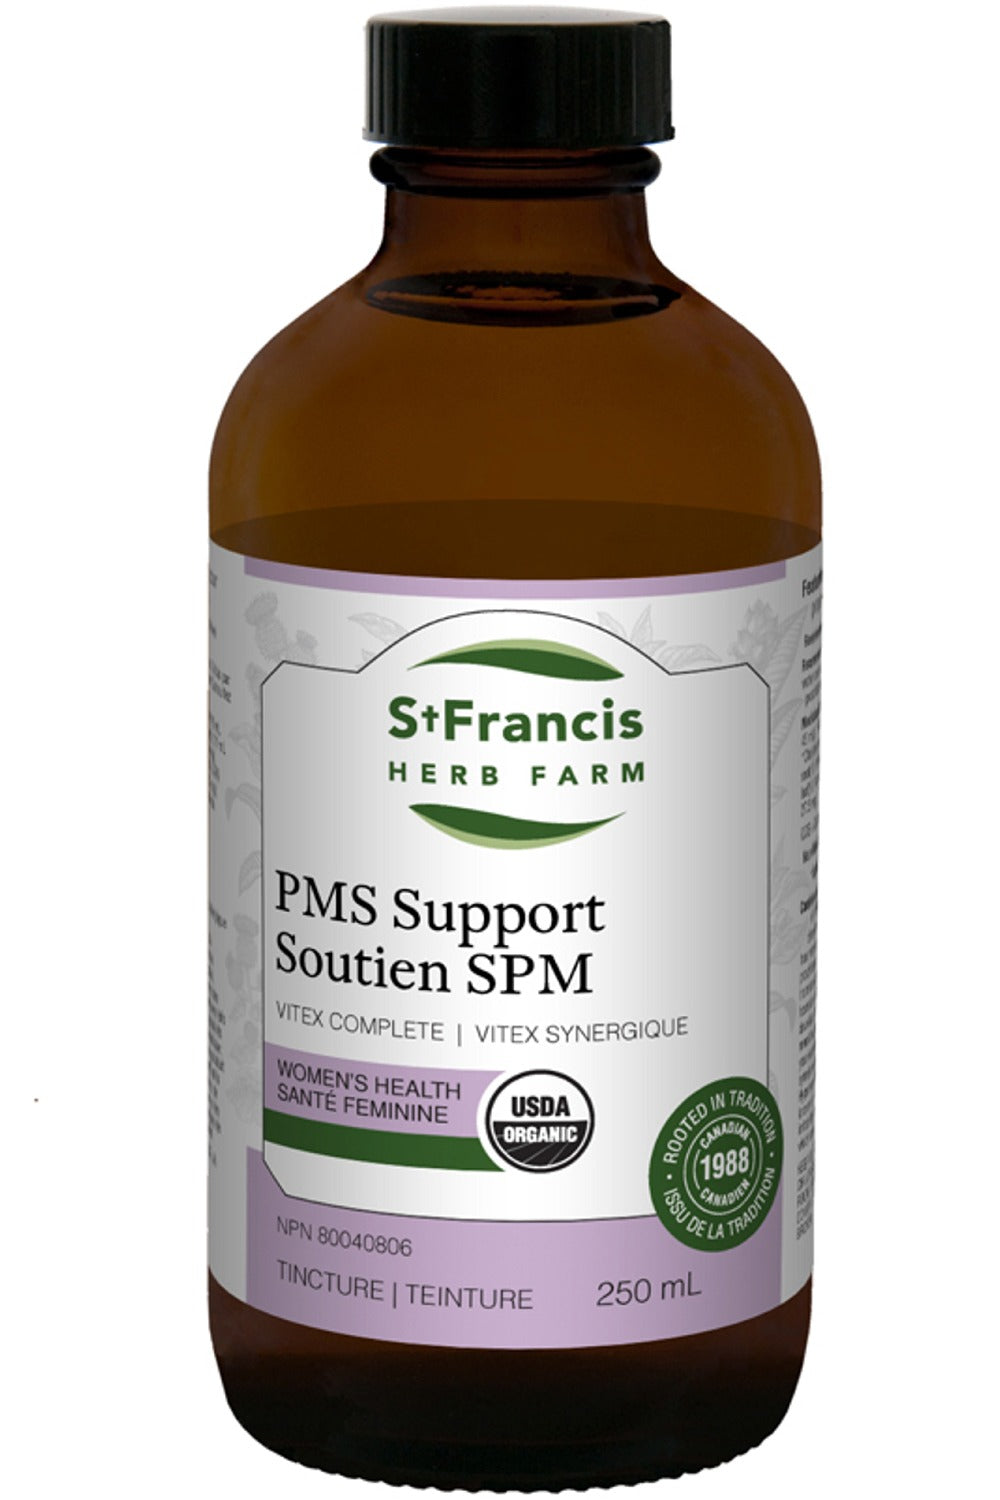 ST FRANCIS HERB FARM PMS Support (250 ml)